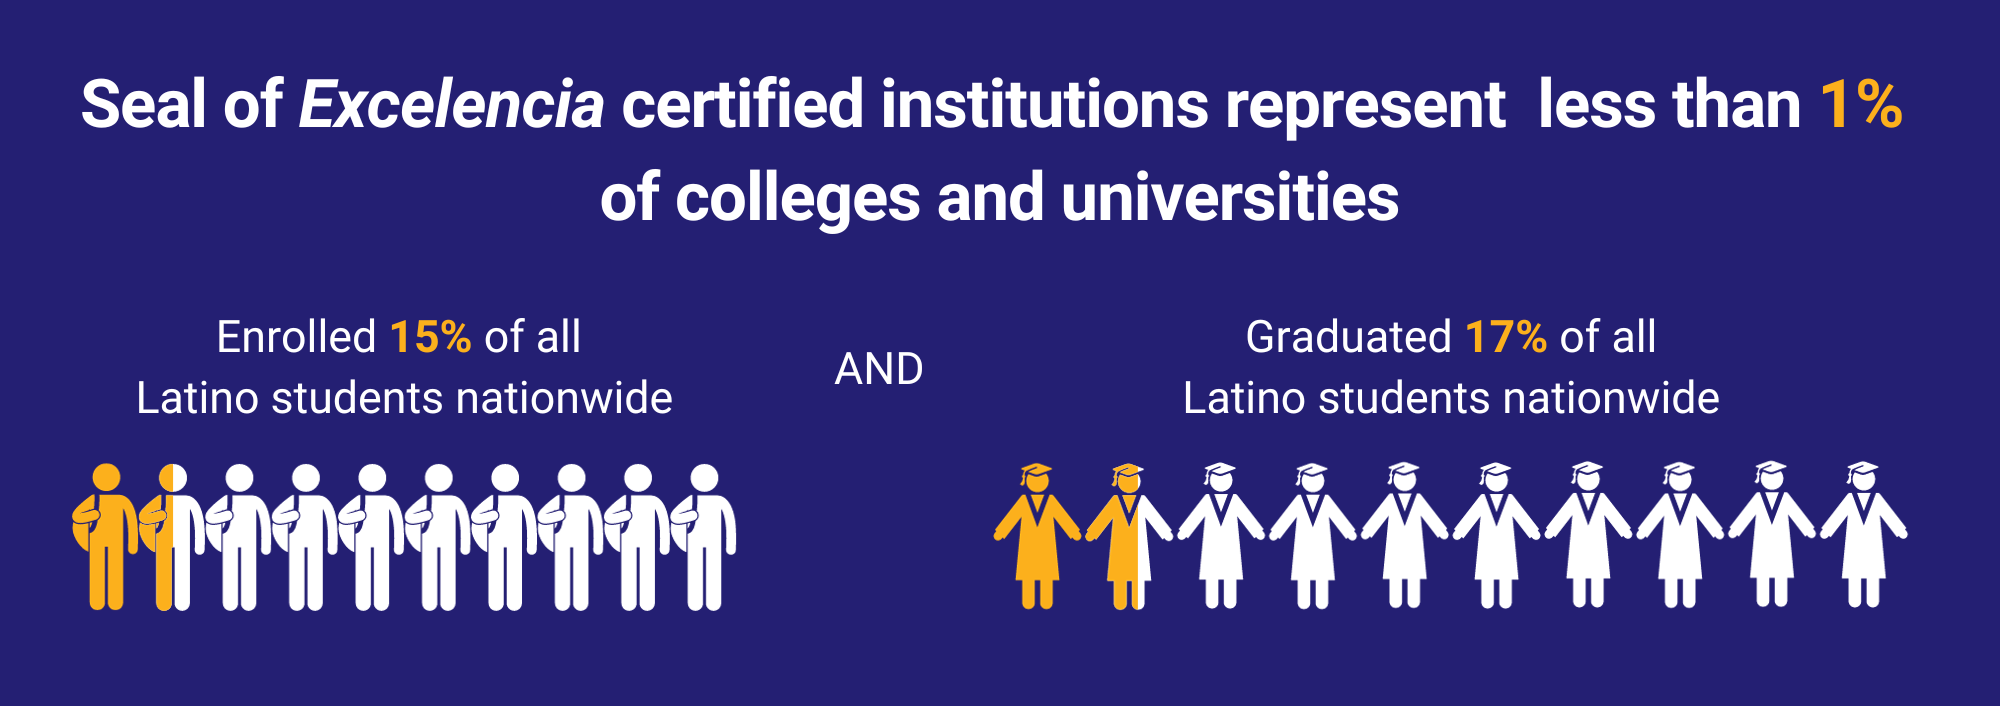 Seal of Excelencia certified institutions represented less than 1% of colleges/universities yet enrolled 15% and graduated 17% of all Latino students.